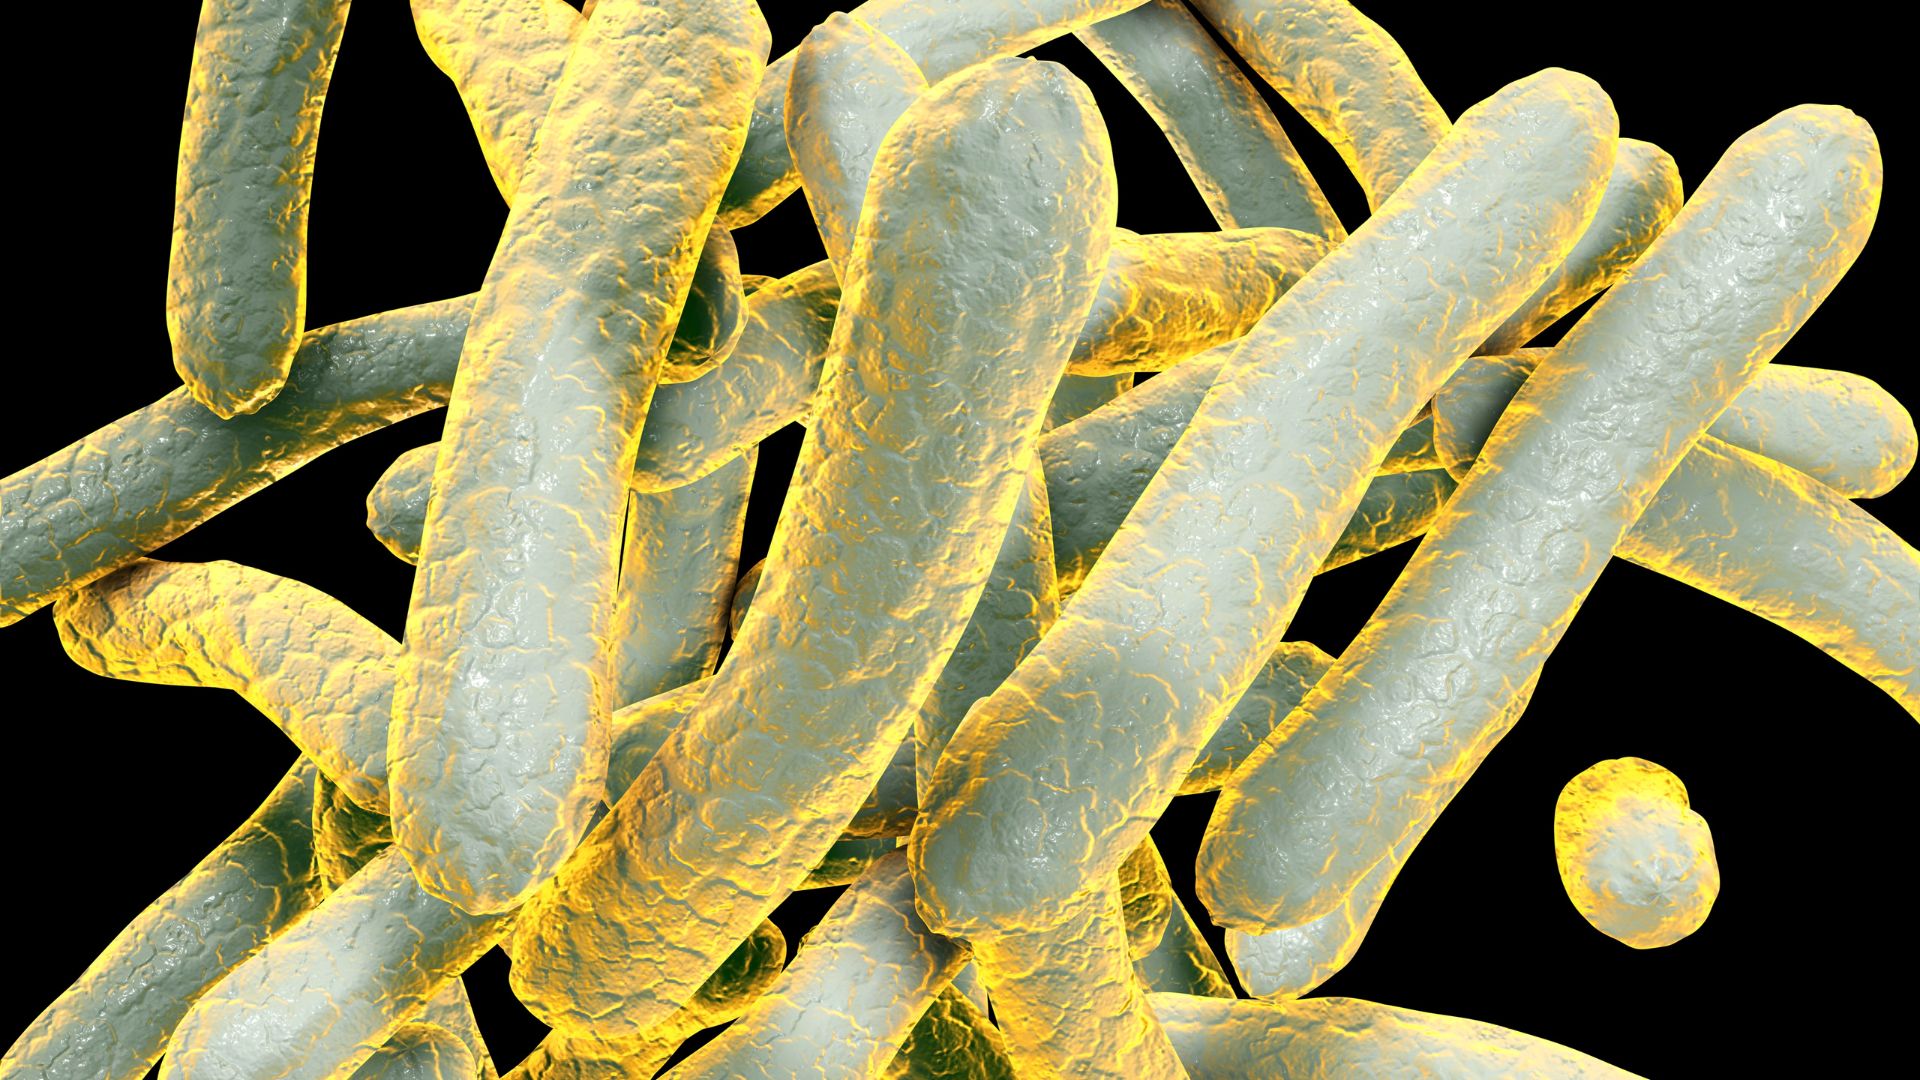 170 people 'likely exposed' to tuberculosis in Long Beach outbreak